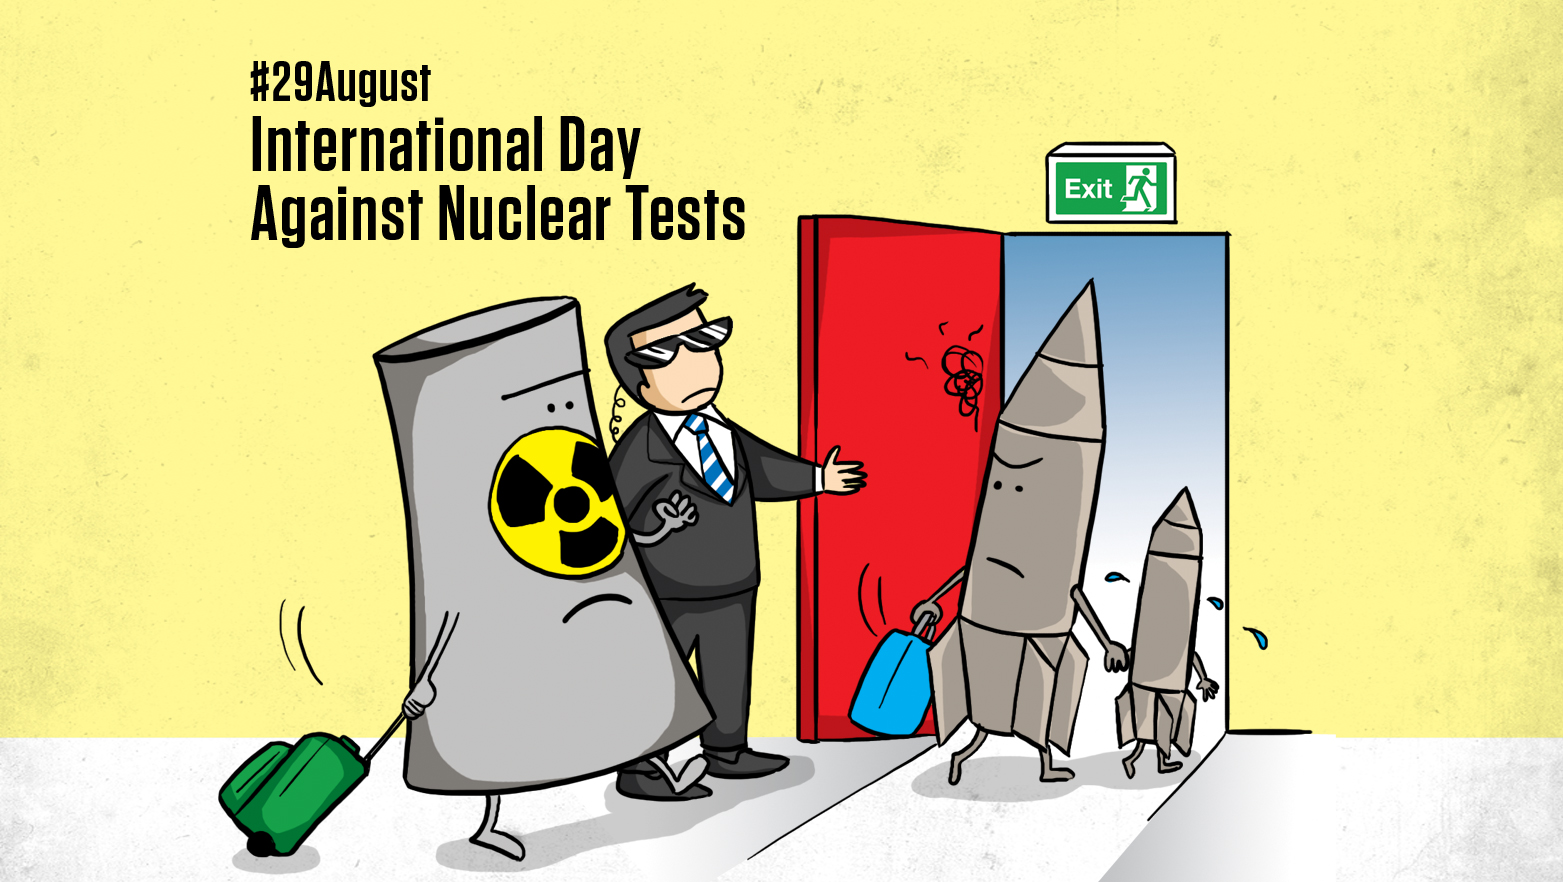 International day against nuclear tests